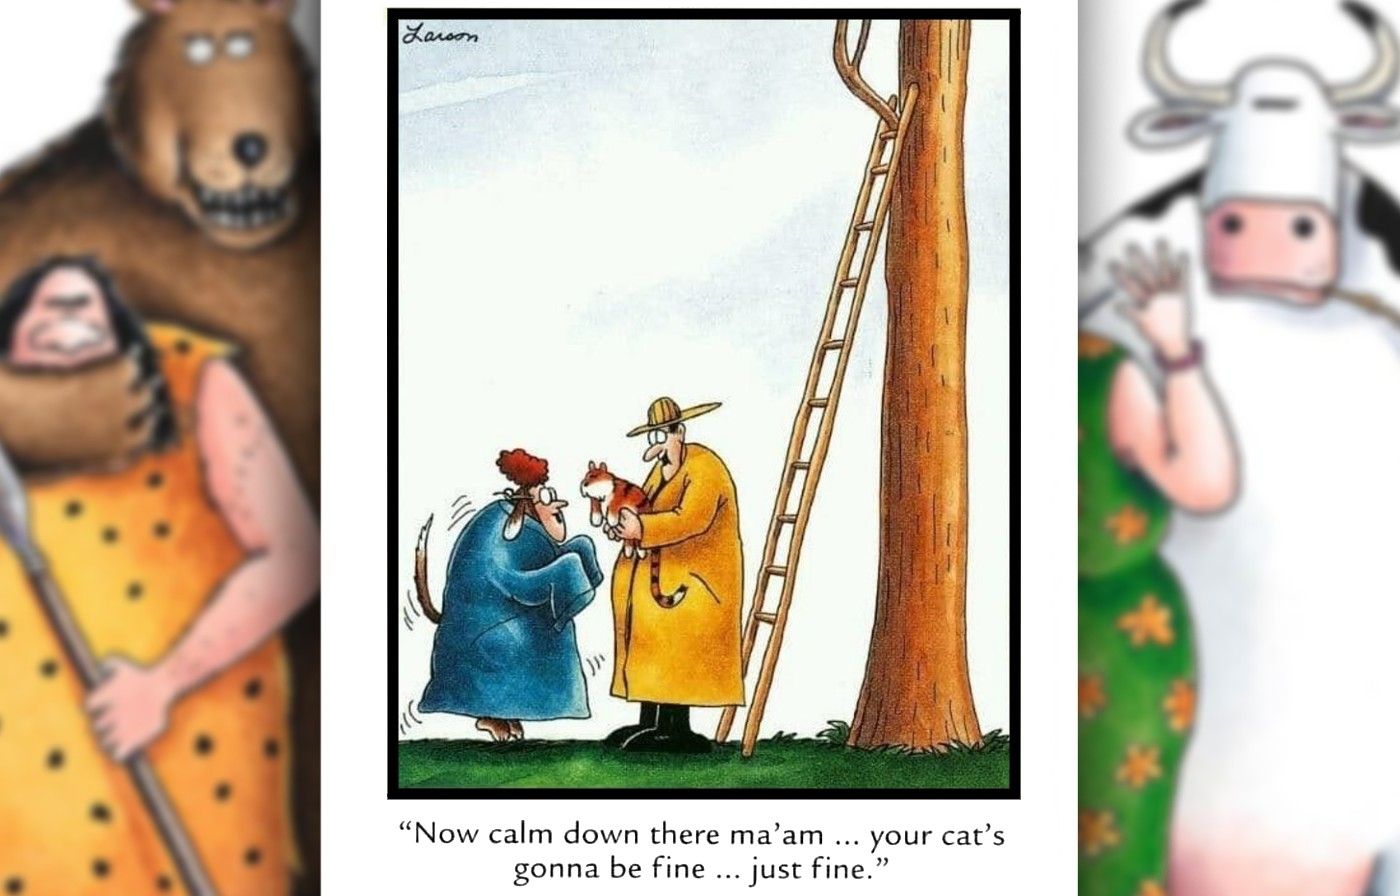 the far side comic where a fireman is tricked into retrieving a cat from a tree on behalf of a dog